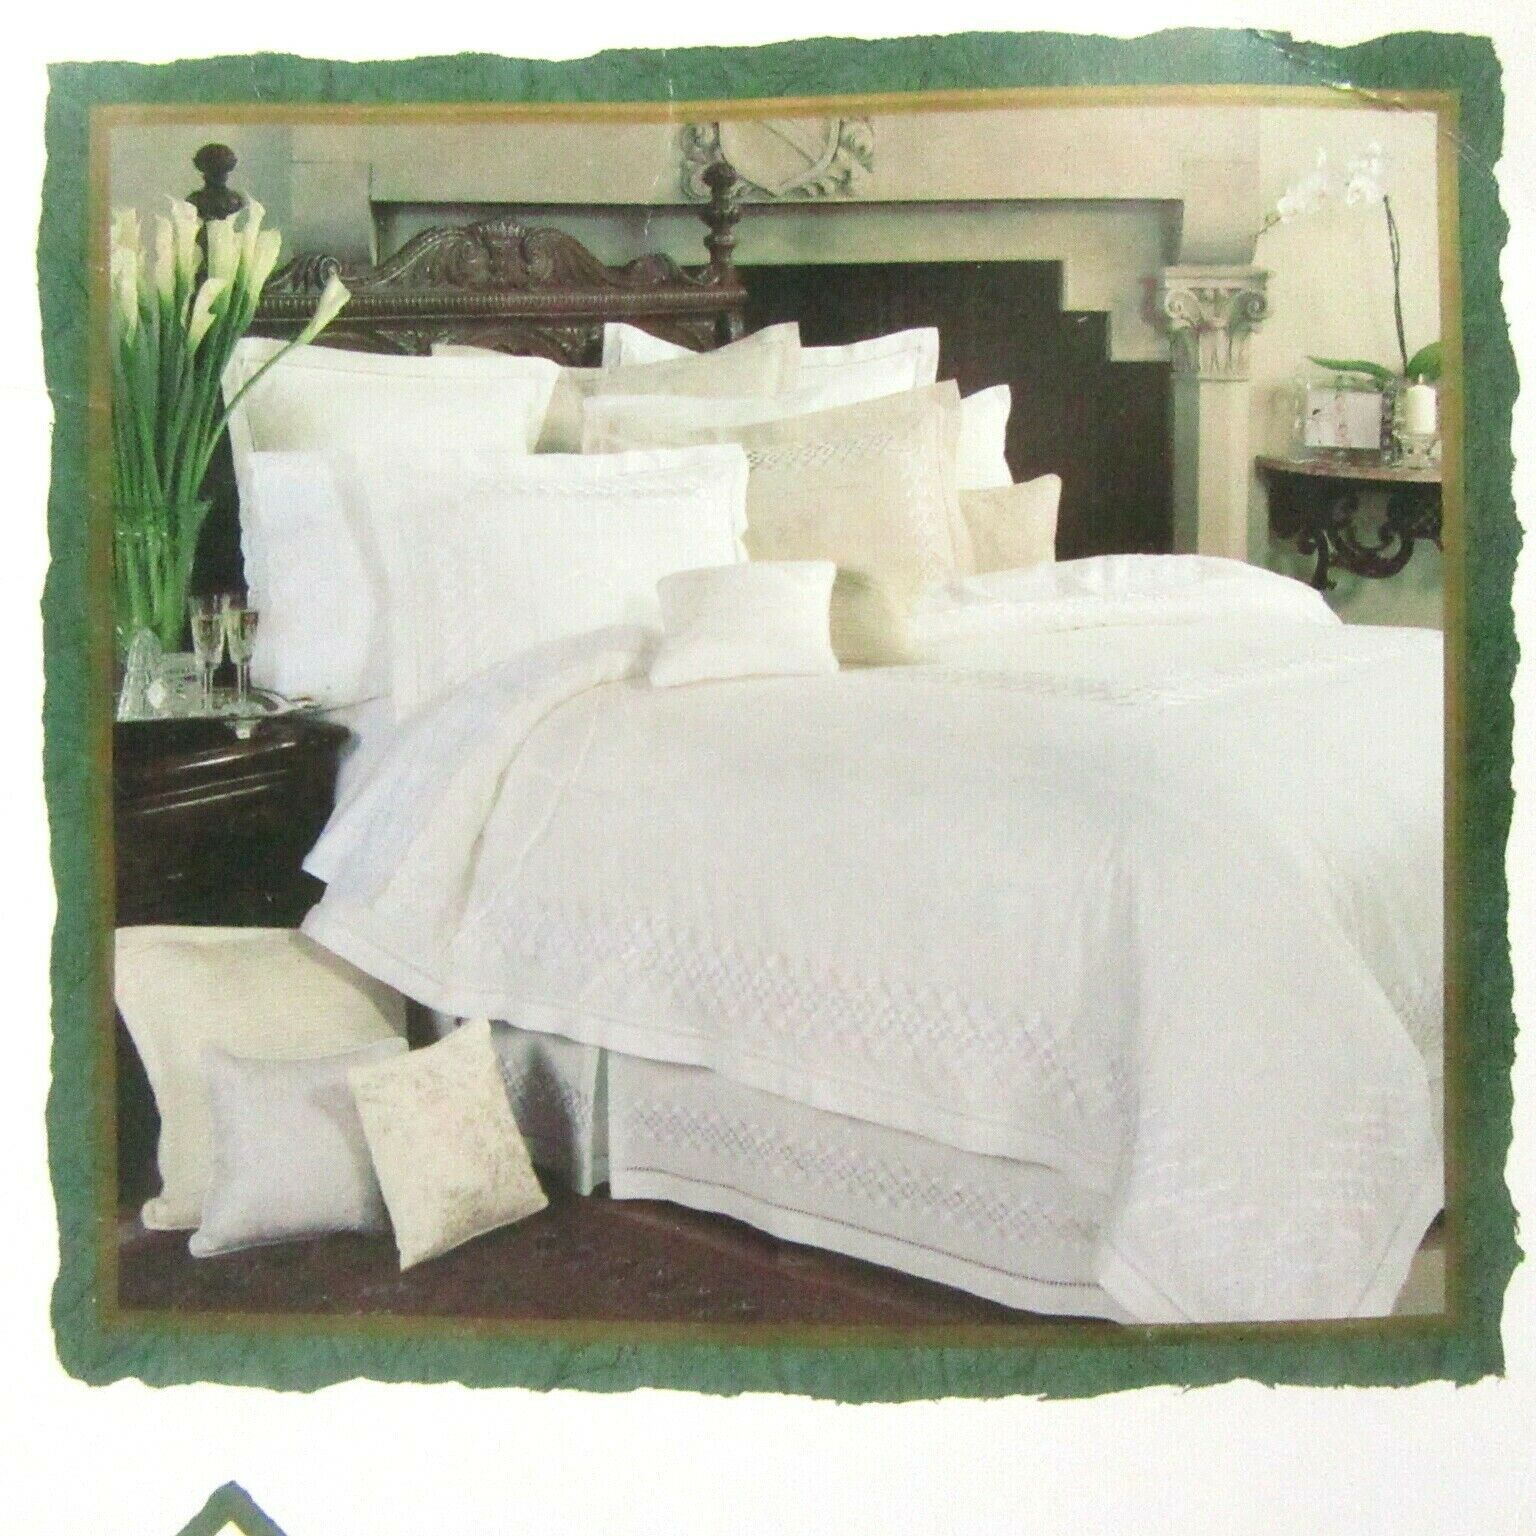 Waterford Lismore Embroidered Linen Blend Cal. King Bed-Skirt - $90.00